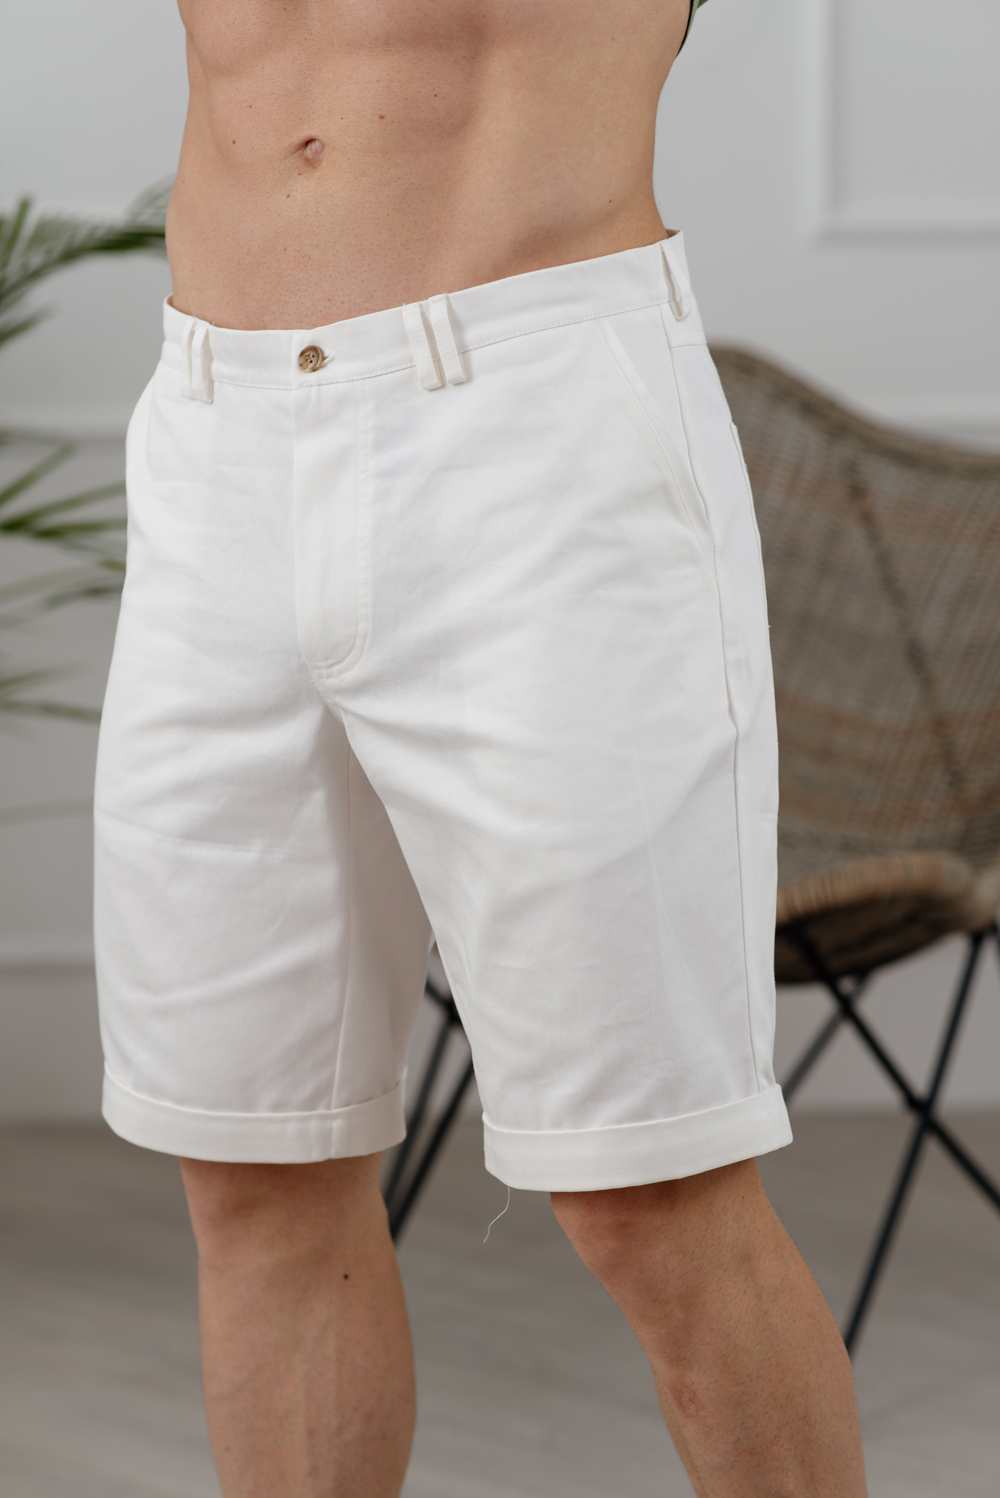 White cotton shorts with cuffs